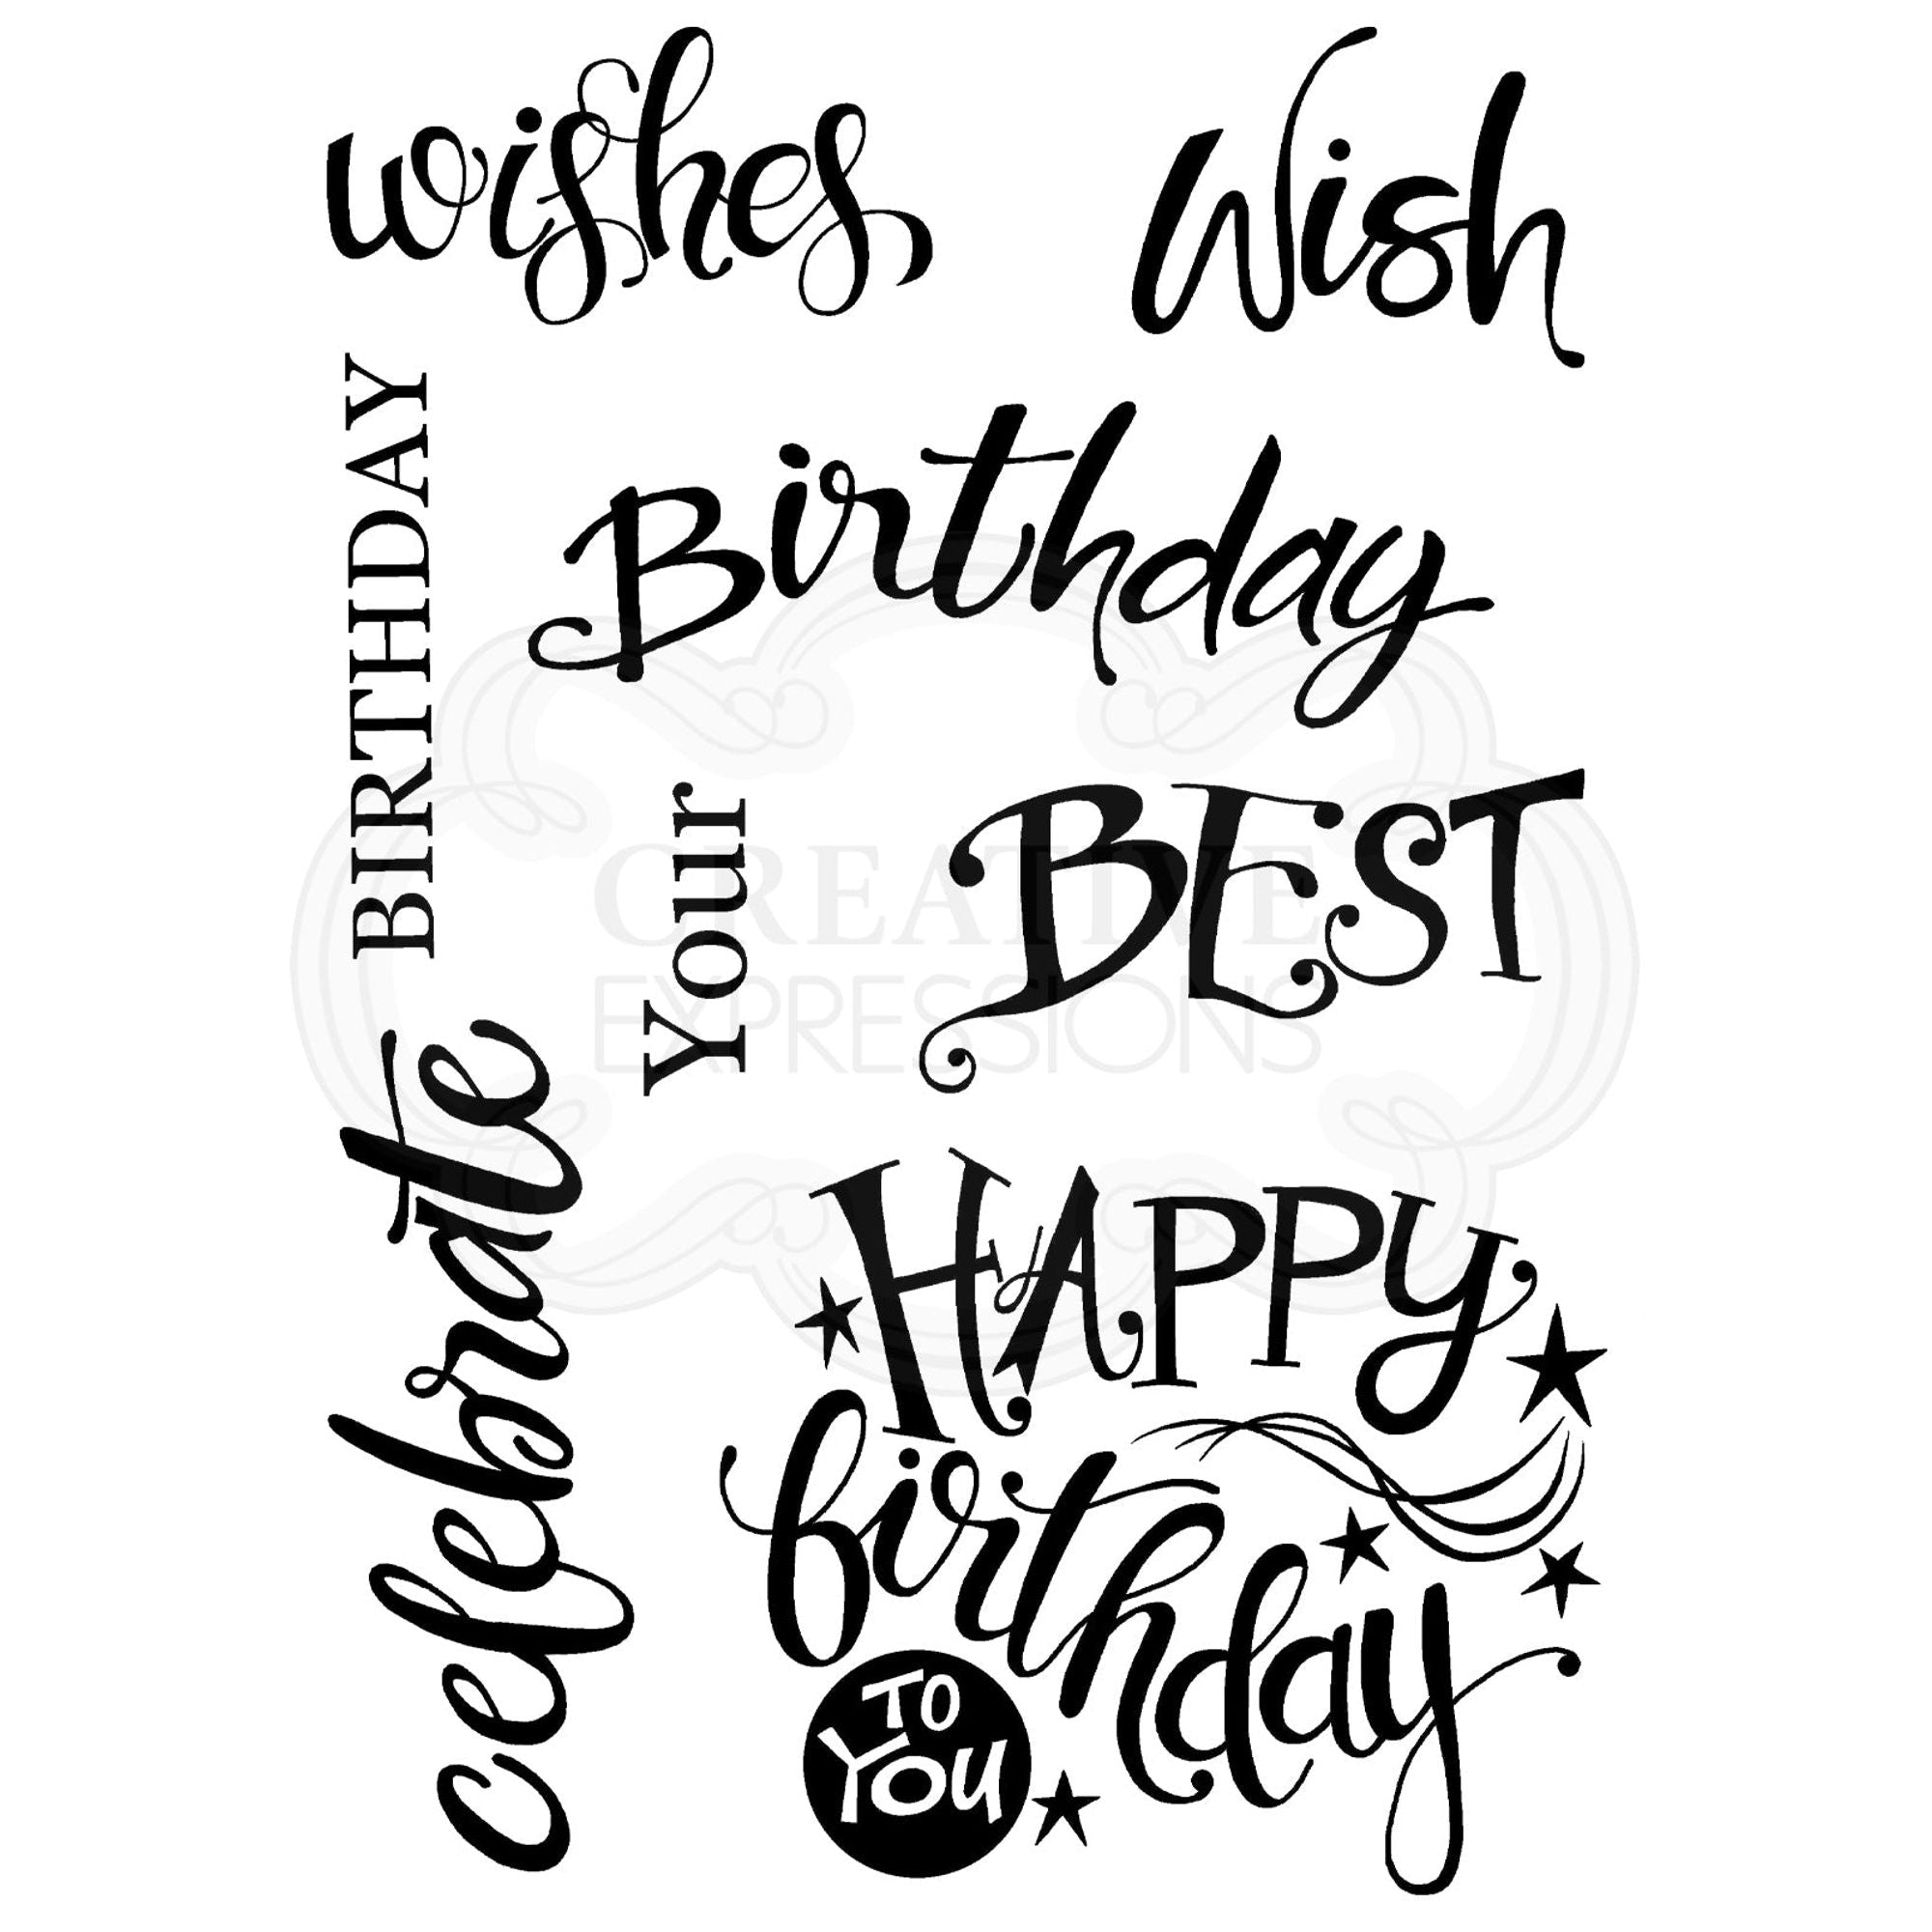 Woodware Clear Singles A Birthday Moment 4 in x 6 in Stamp